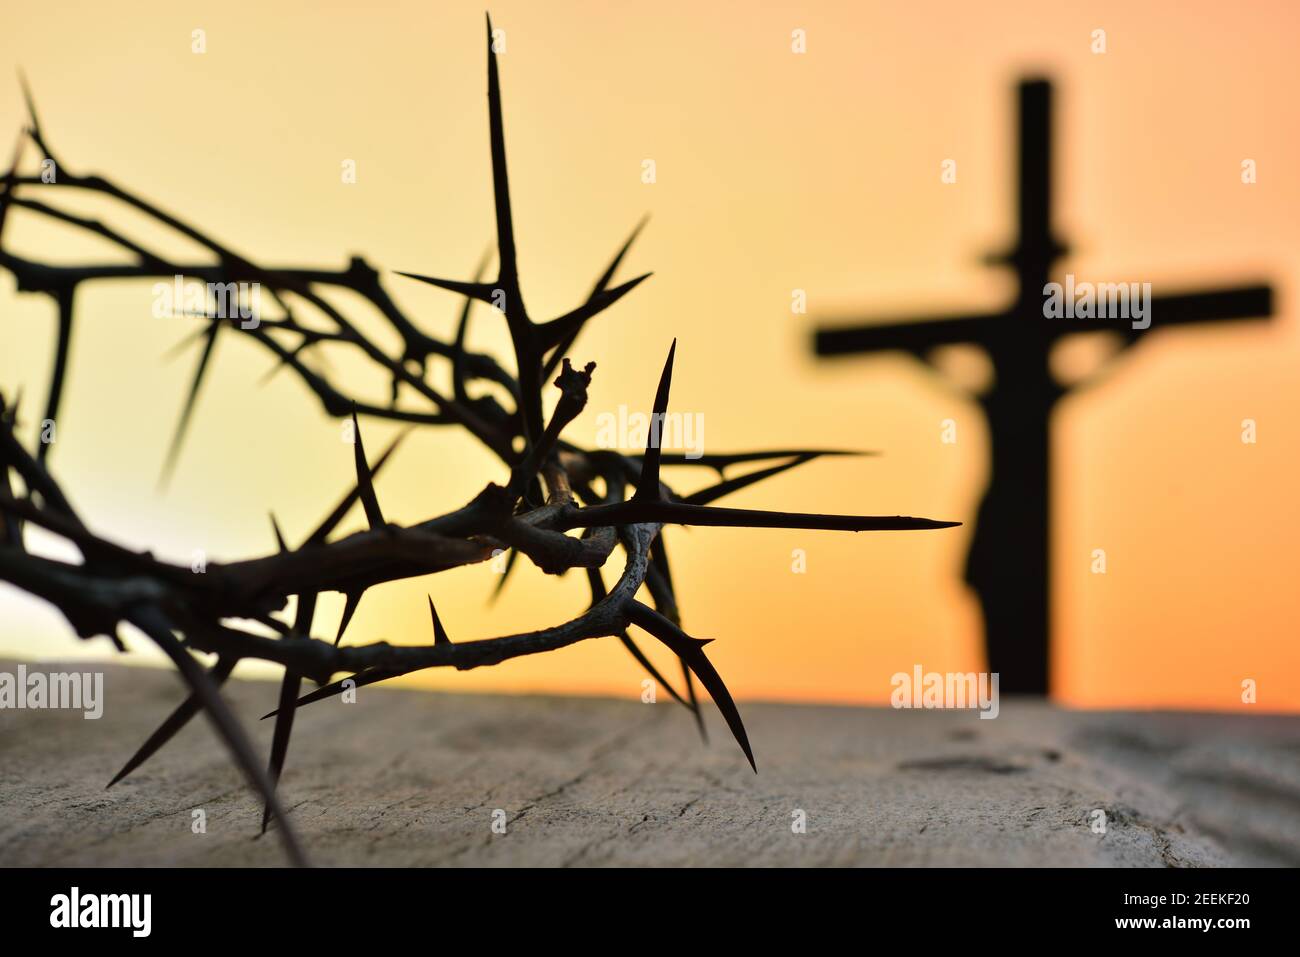 Crown of thorns of Jesus Christ against silhouette of catholic cross at  sunset background Stock Photo - Alamy